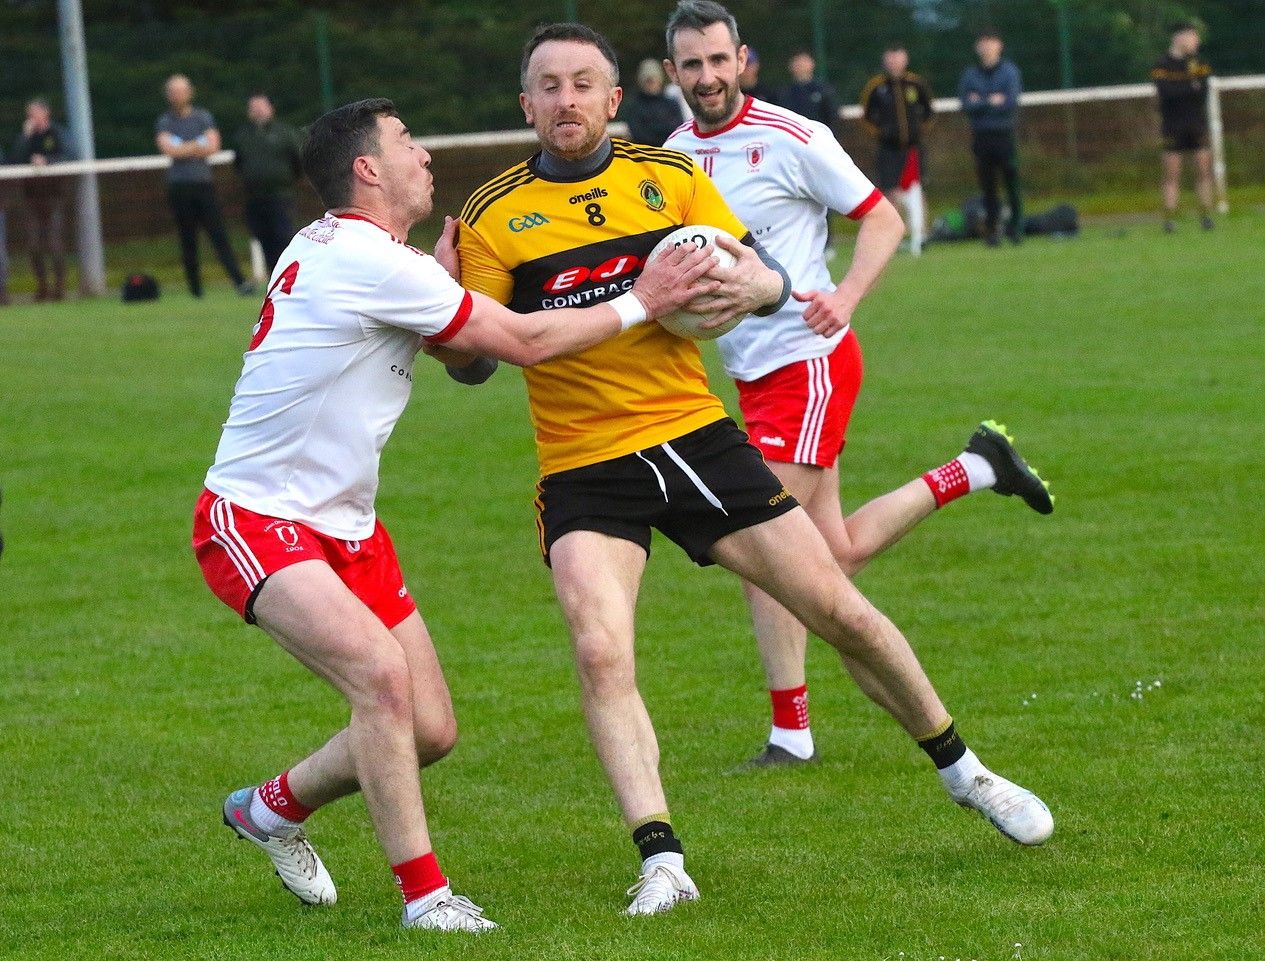 Lámh Dhearg defeated Naomh Éanna on Wednesday with the Red Hands hoping to back that up with victory at Aghagallon on Sunday, while the Glengormley club seek to bounce back at home to Creggan